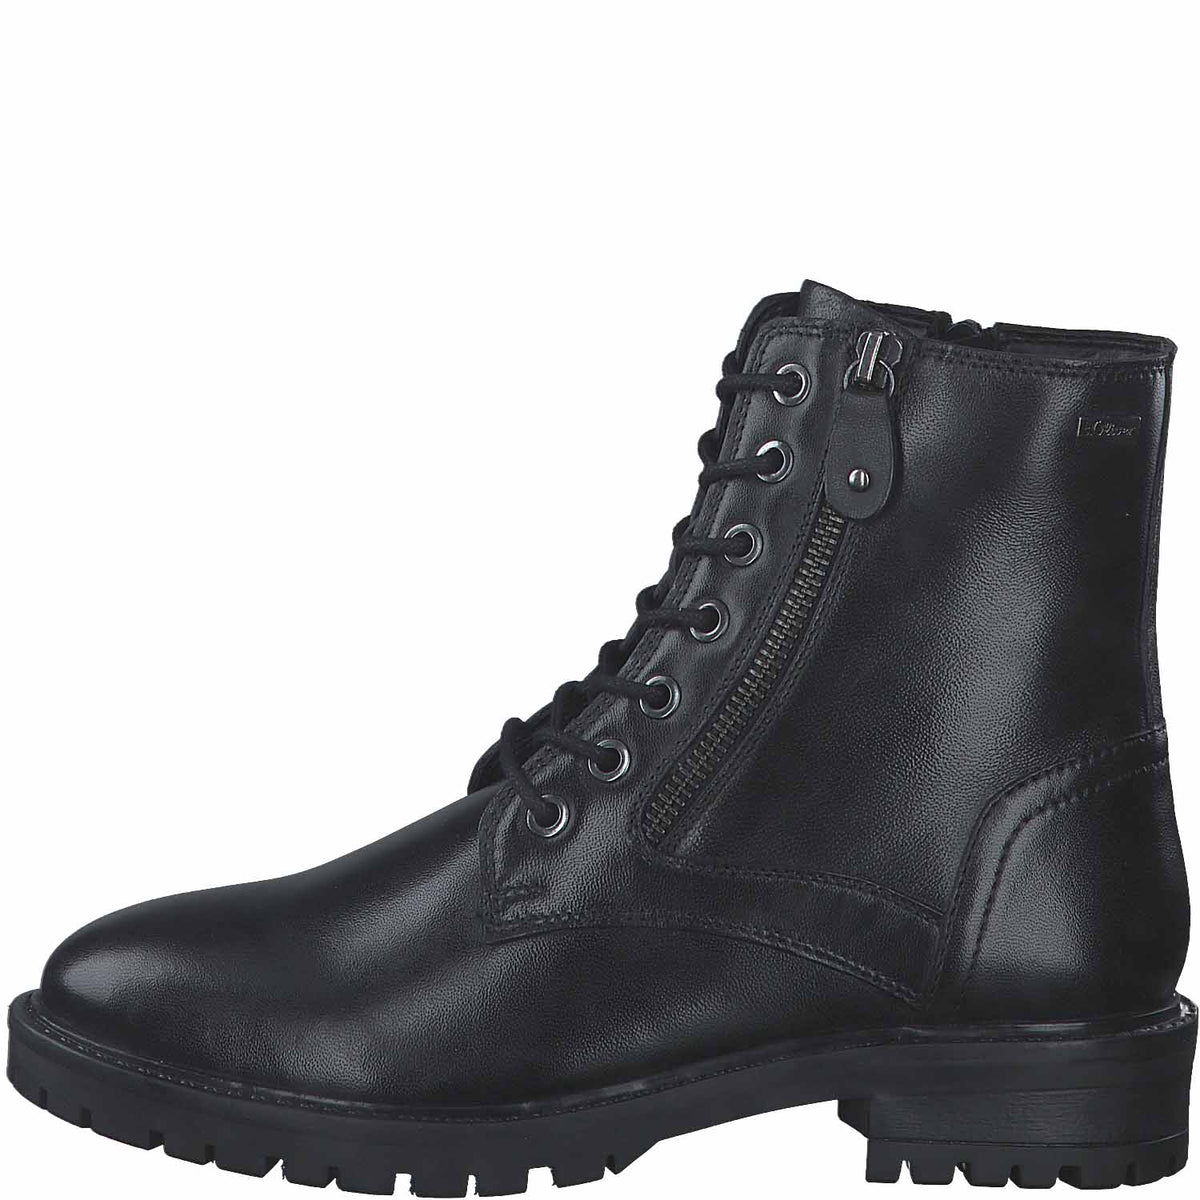 Classic black front view of S. Oliver lace-up boot.